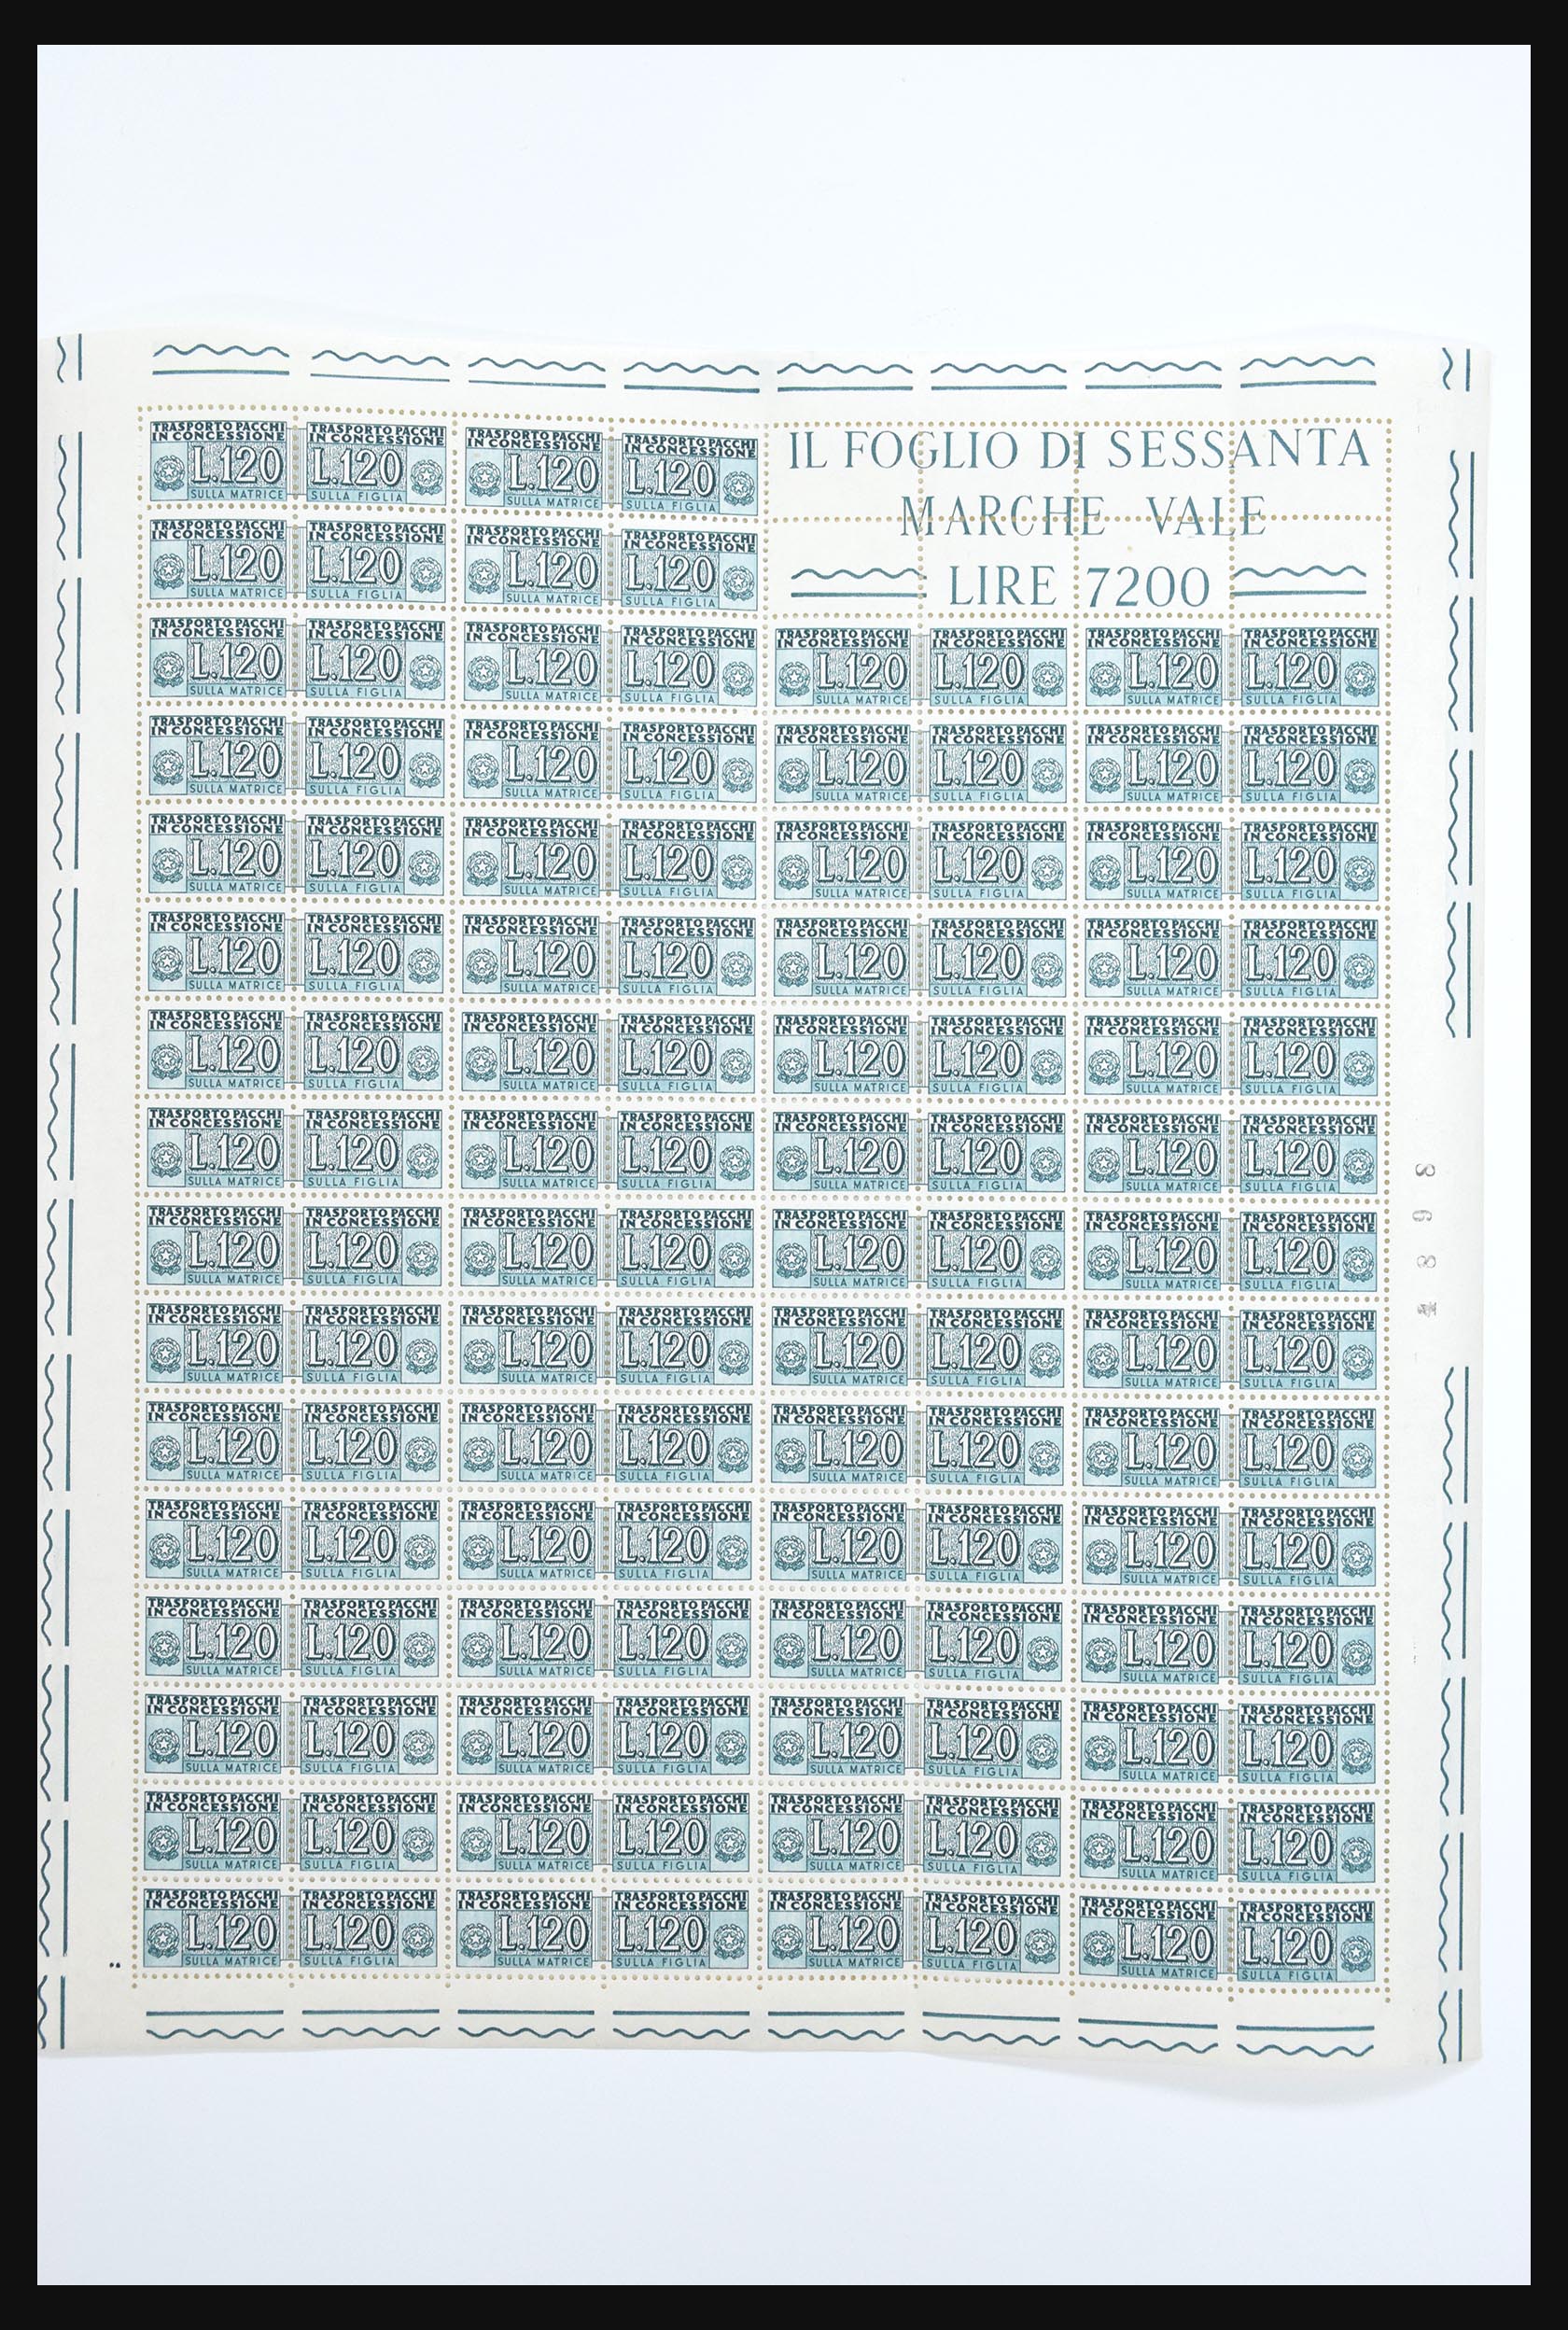 30616 382 - 30616 Italy and territories 1900-1960.